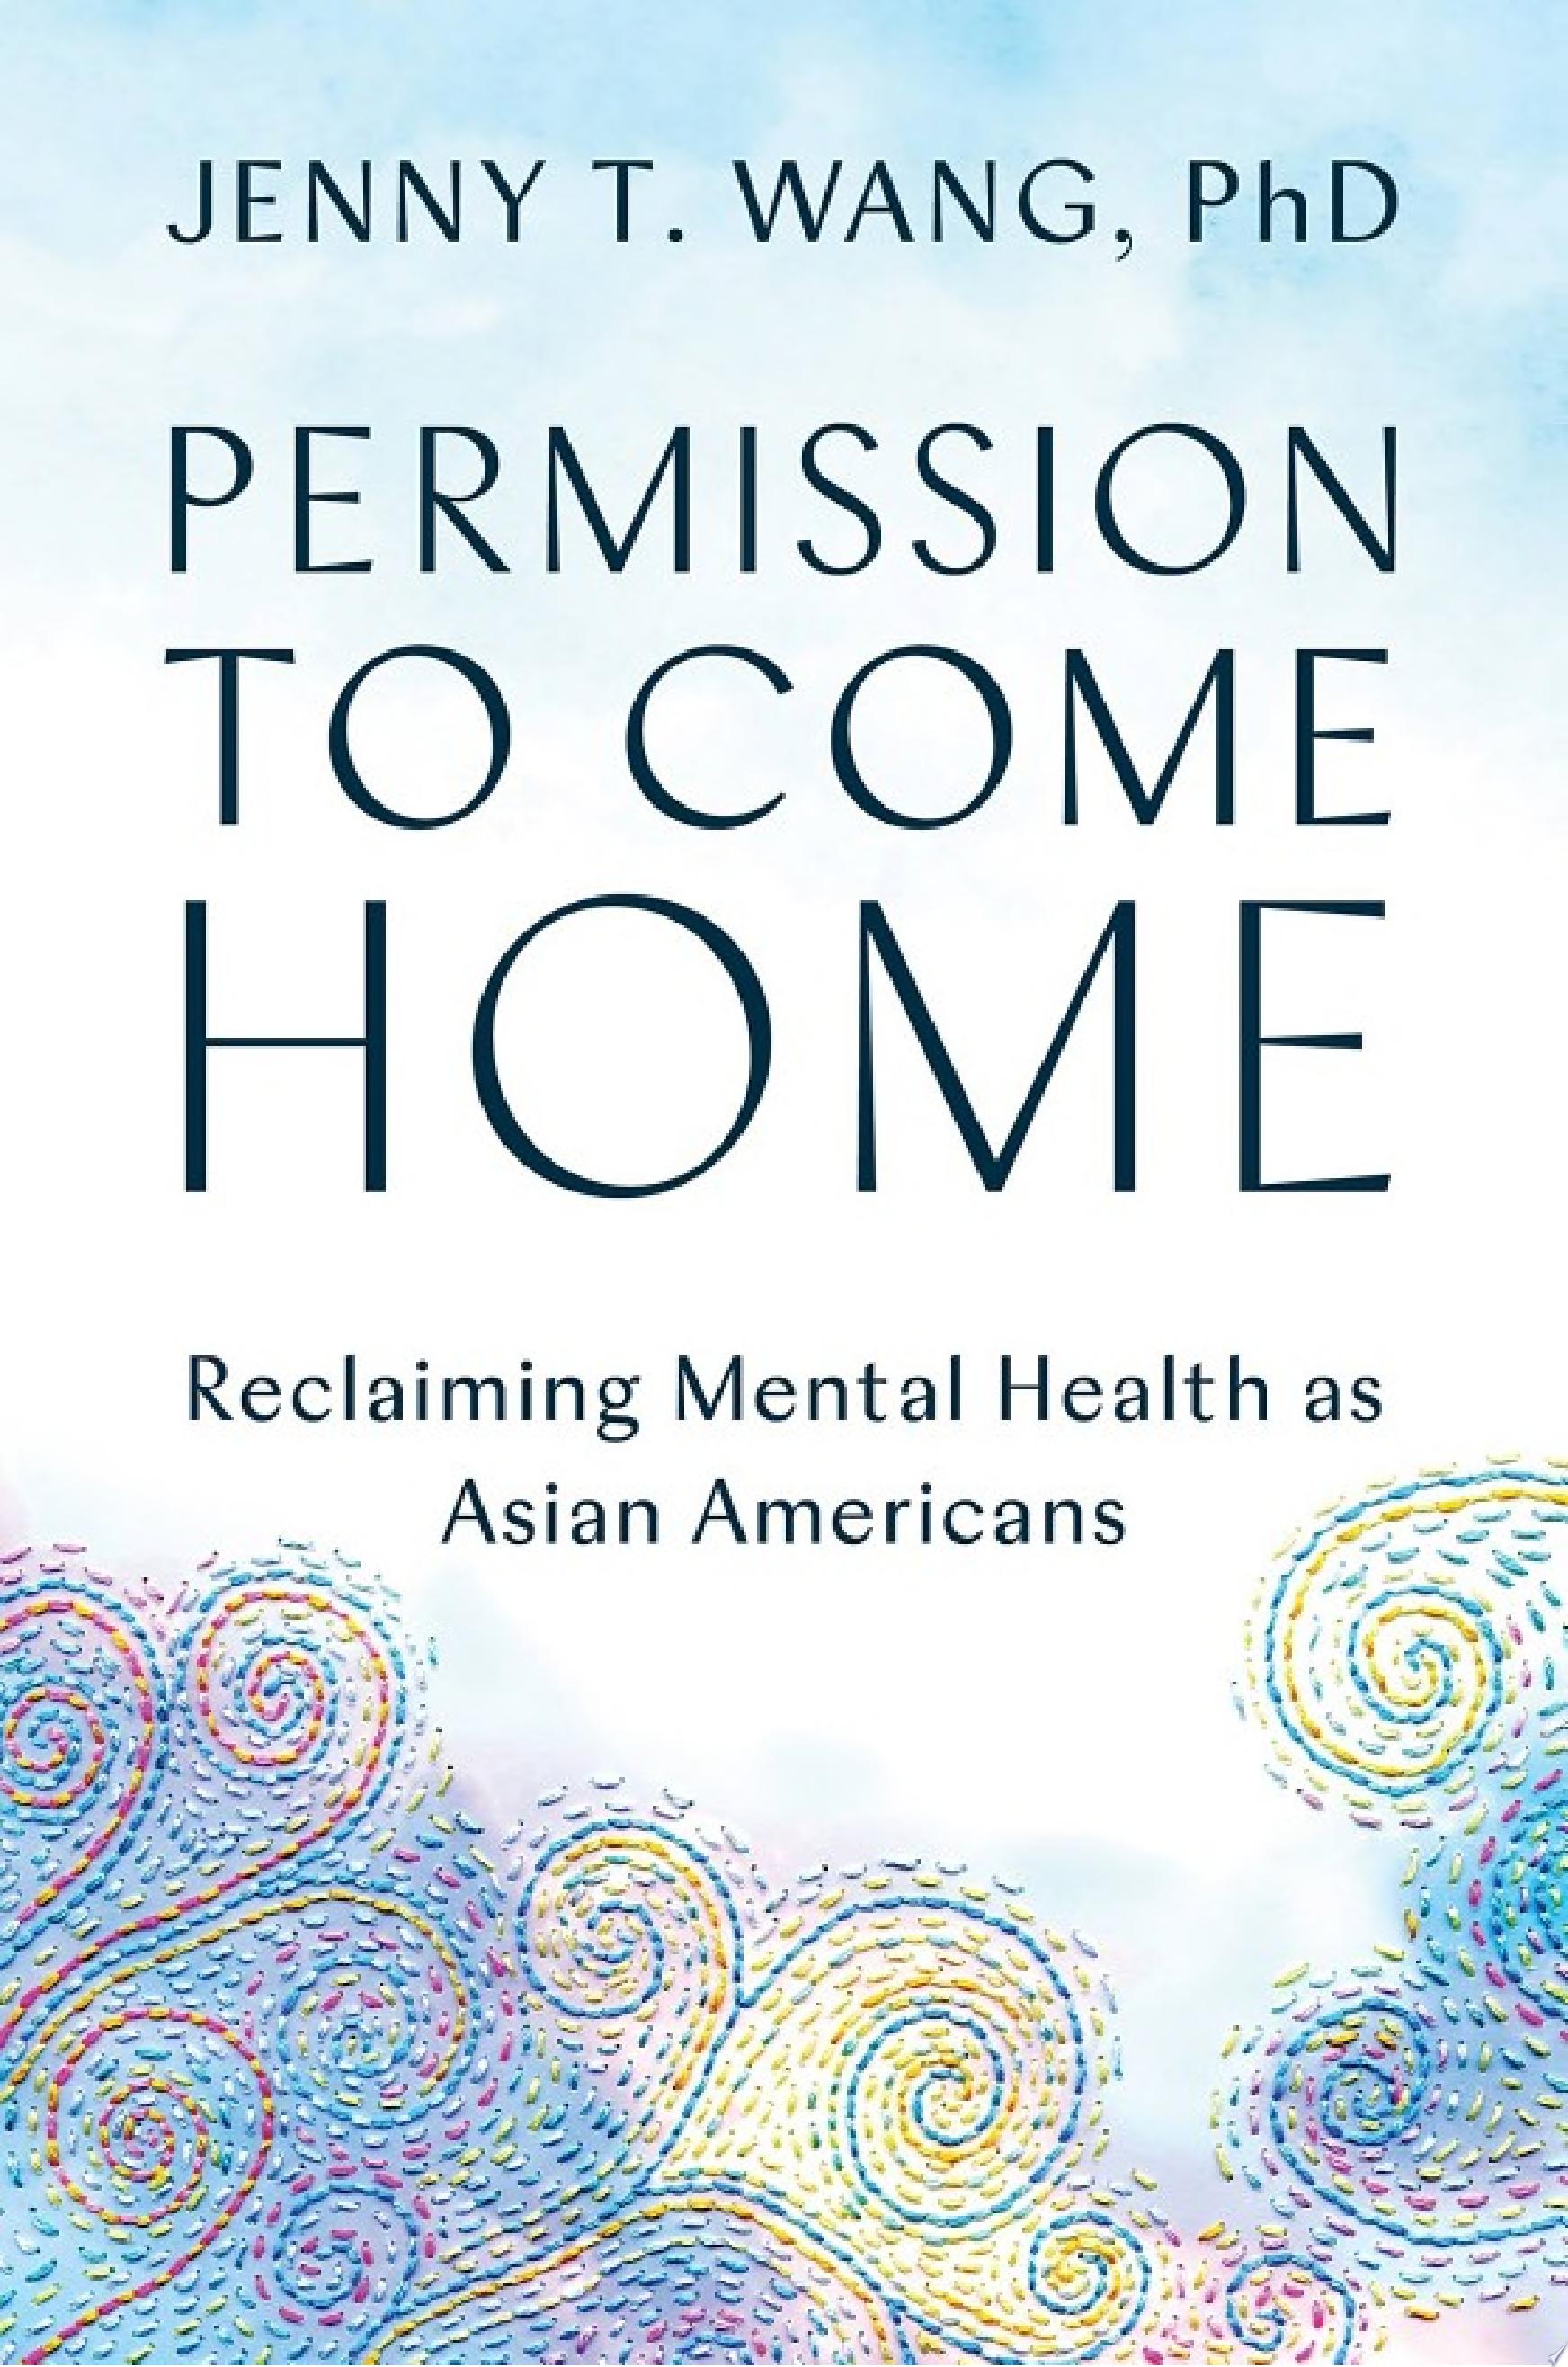 Image for "Permission to Come Home"